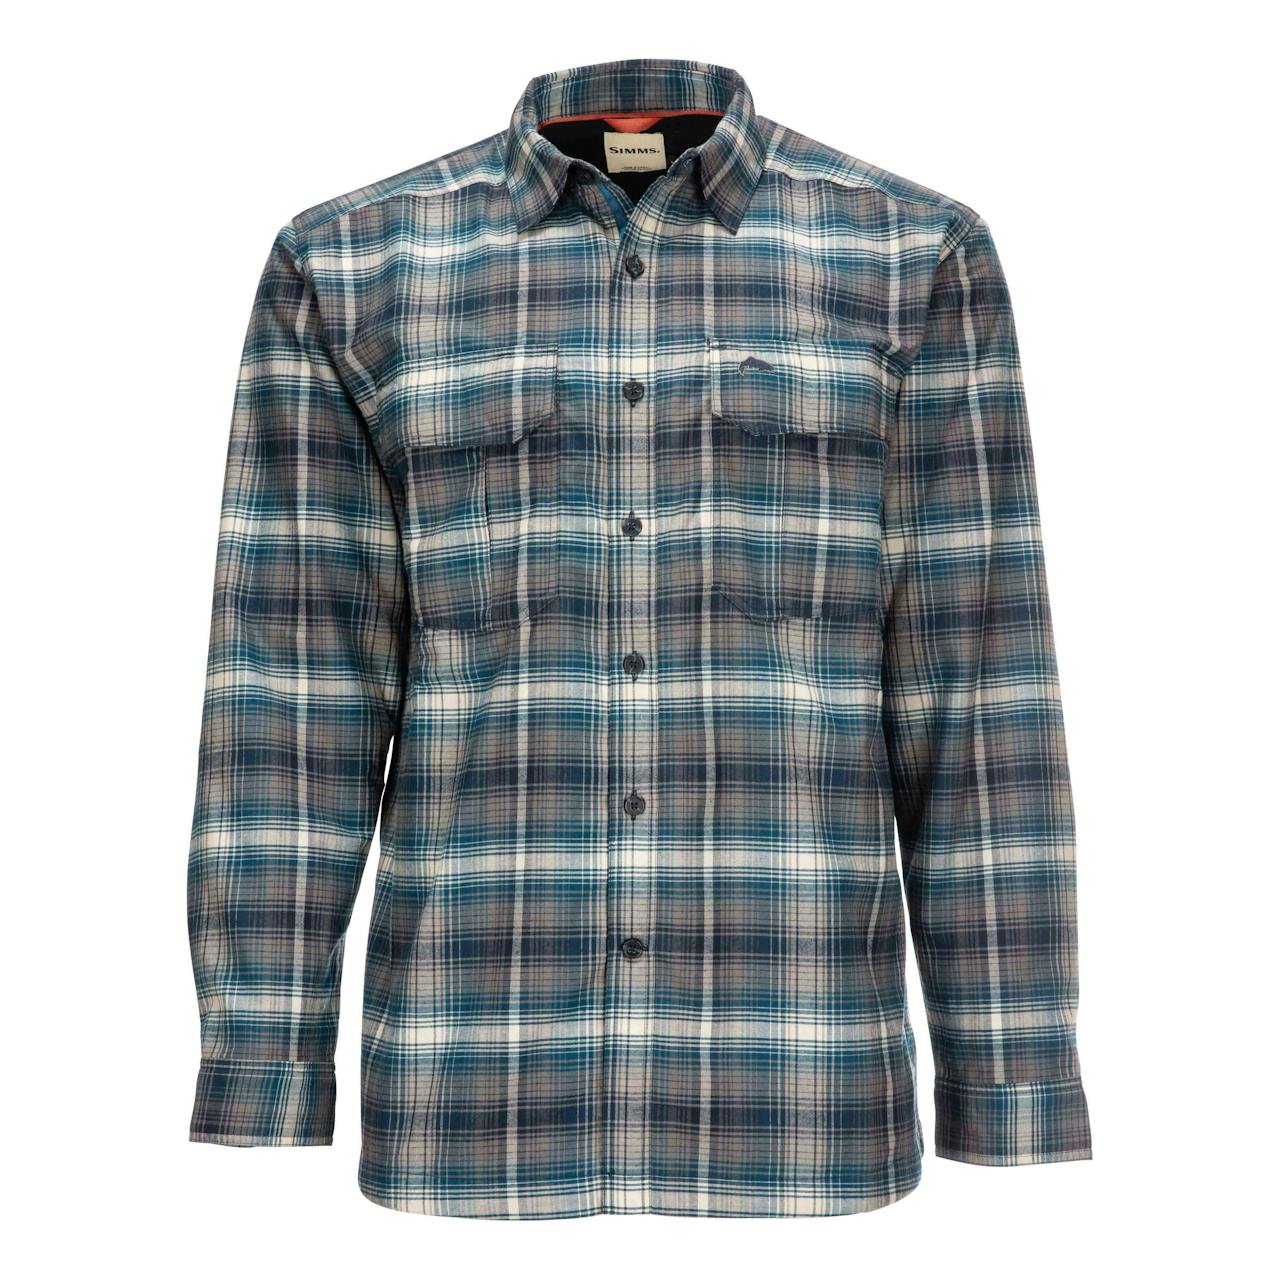 Simms Coldweather Flannel Shirt